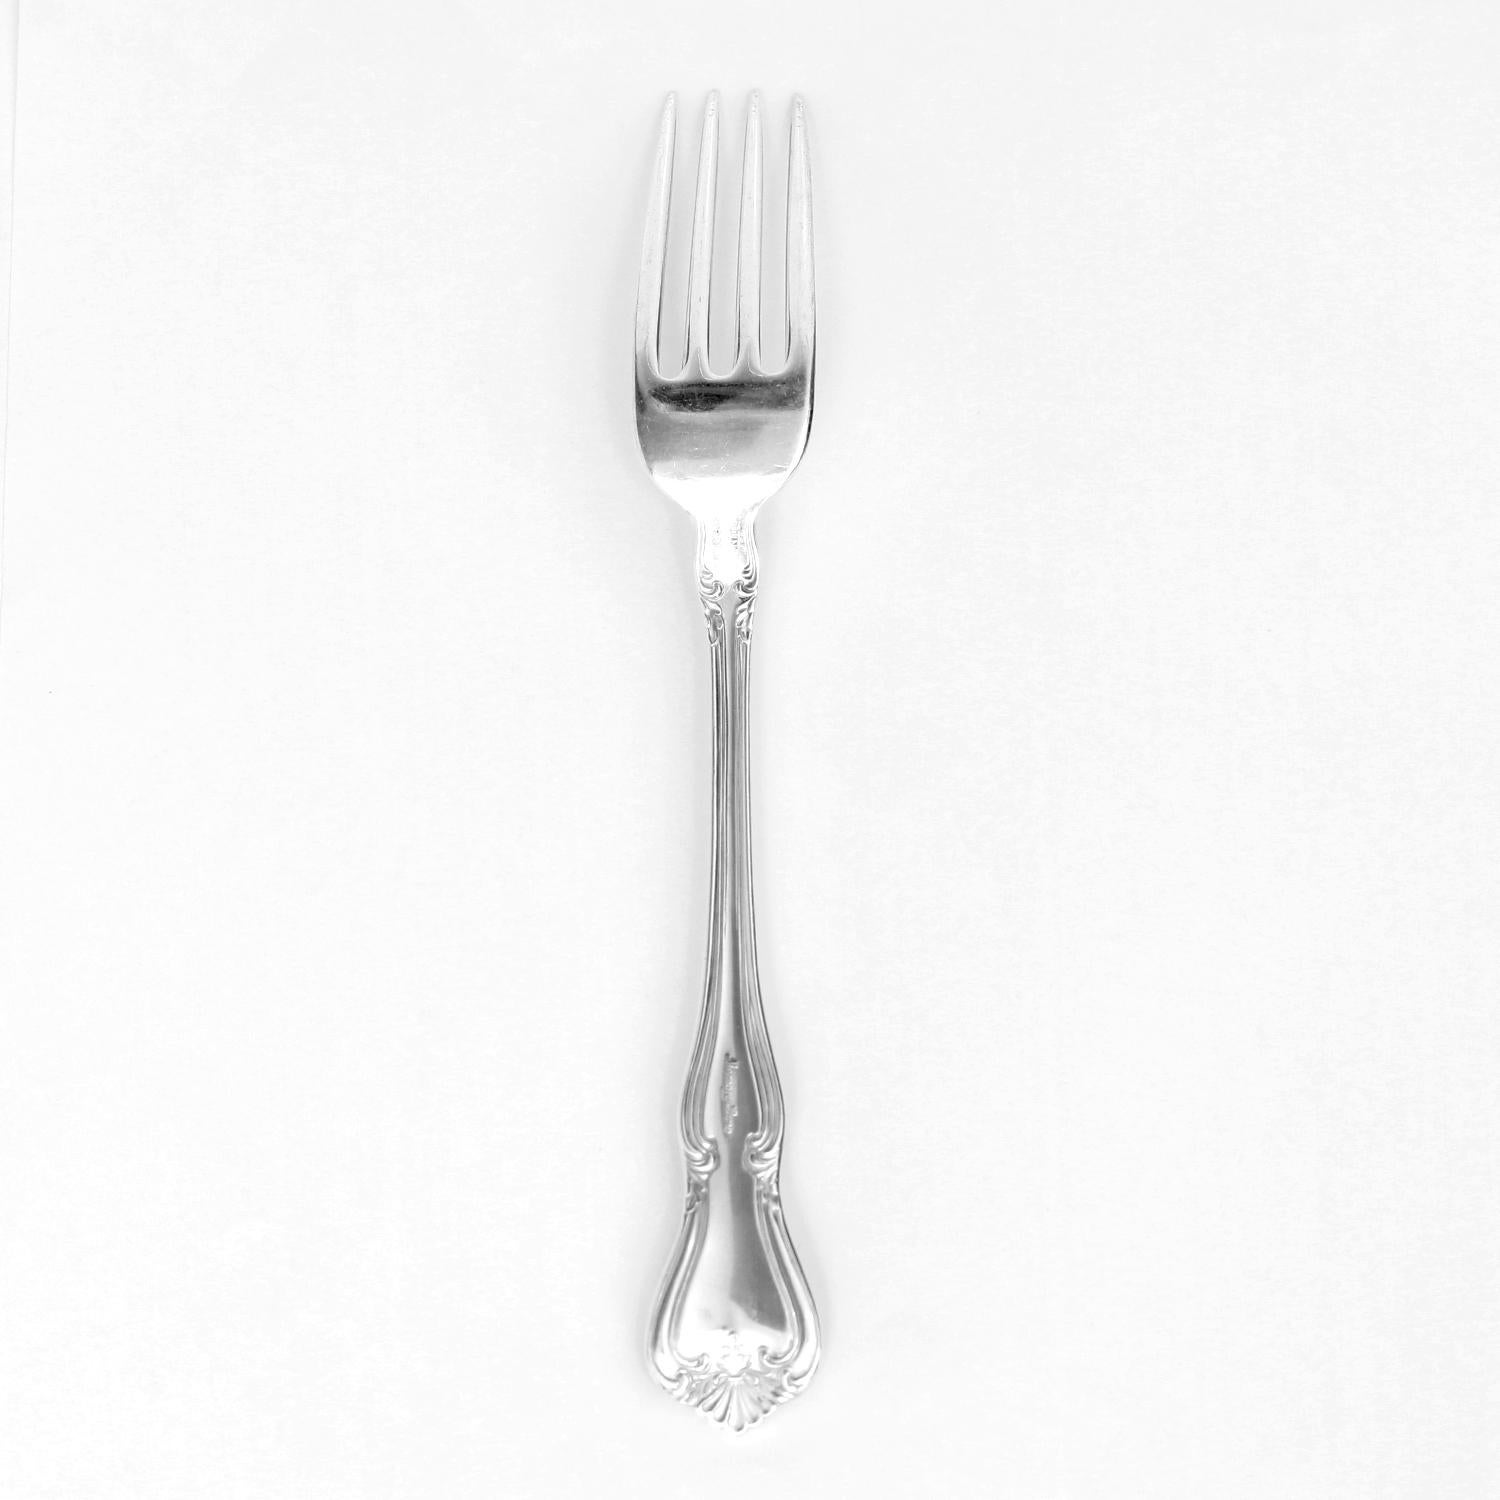 8 piece silver place setting